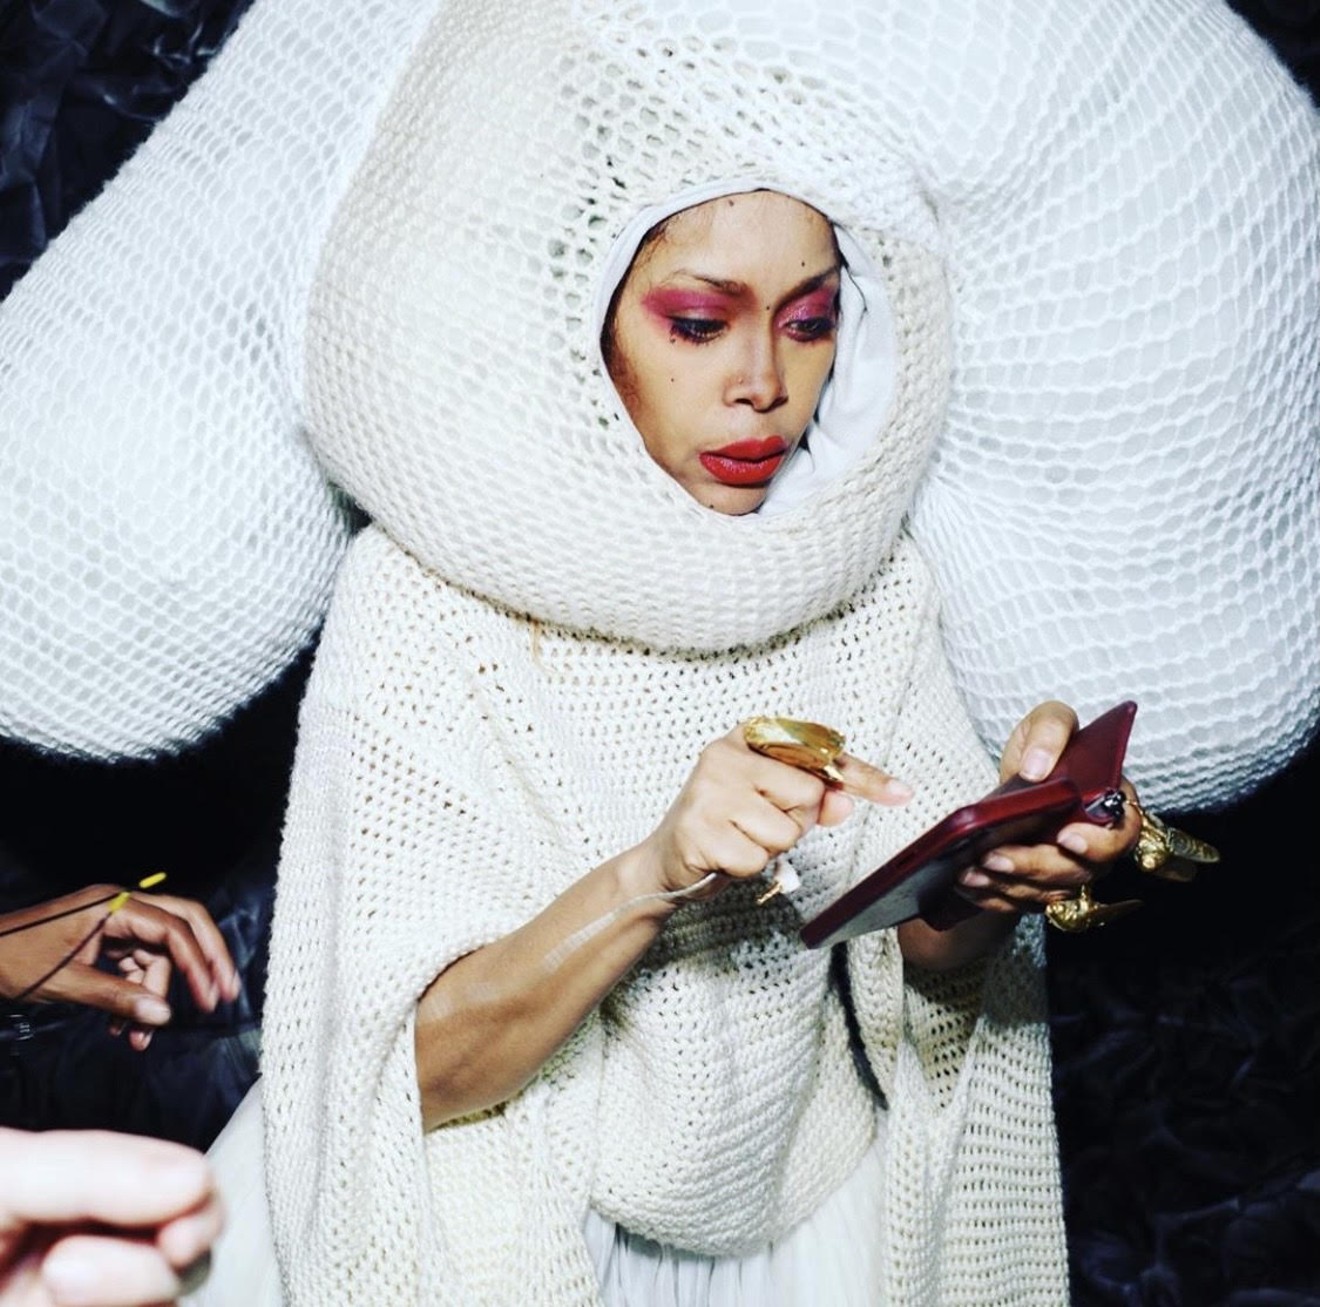 There's gonna be a whole lot of Baduizm happening at the Fenty show.